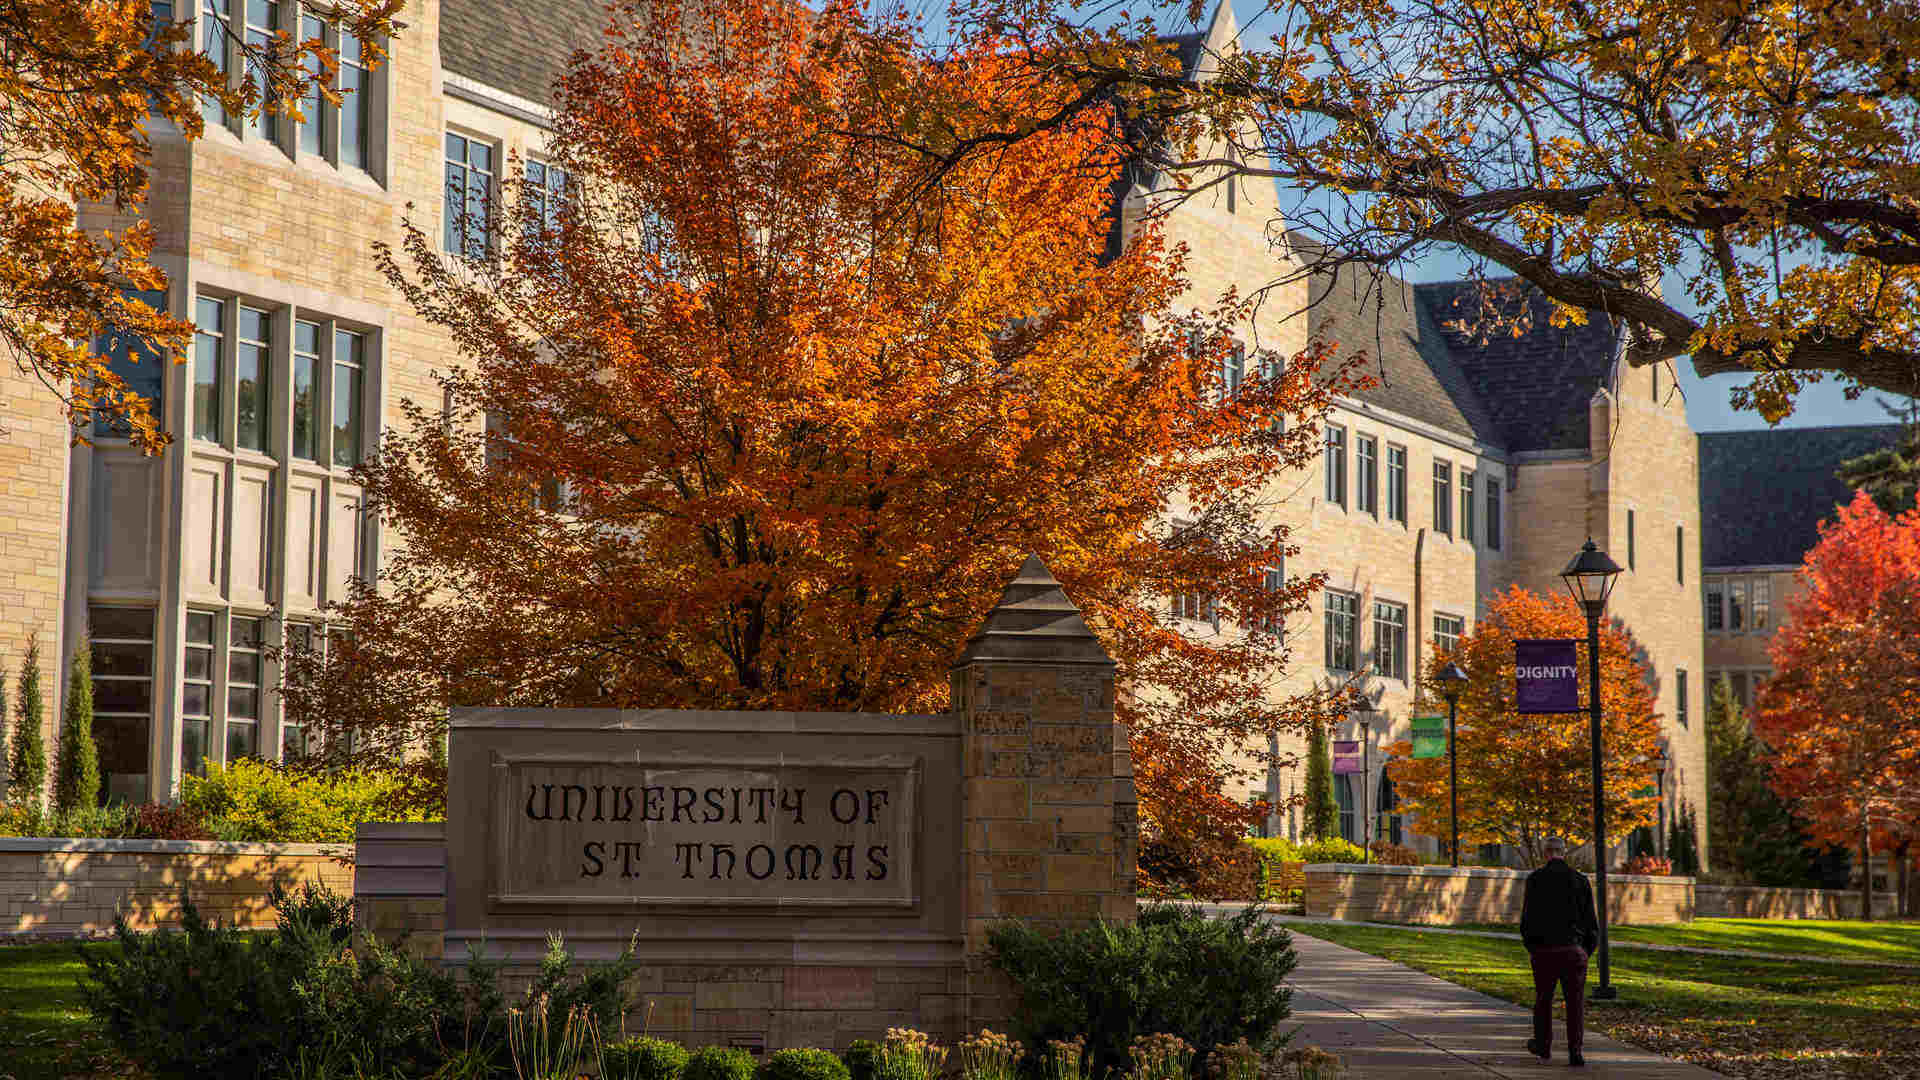 University of St. Thomas sign in front of the Anderson Student Center